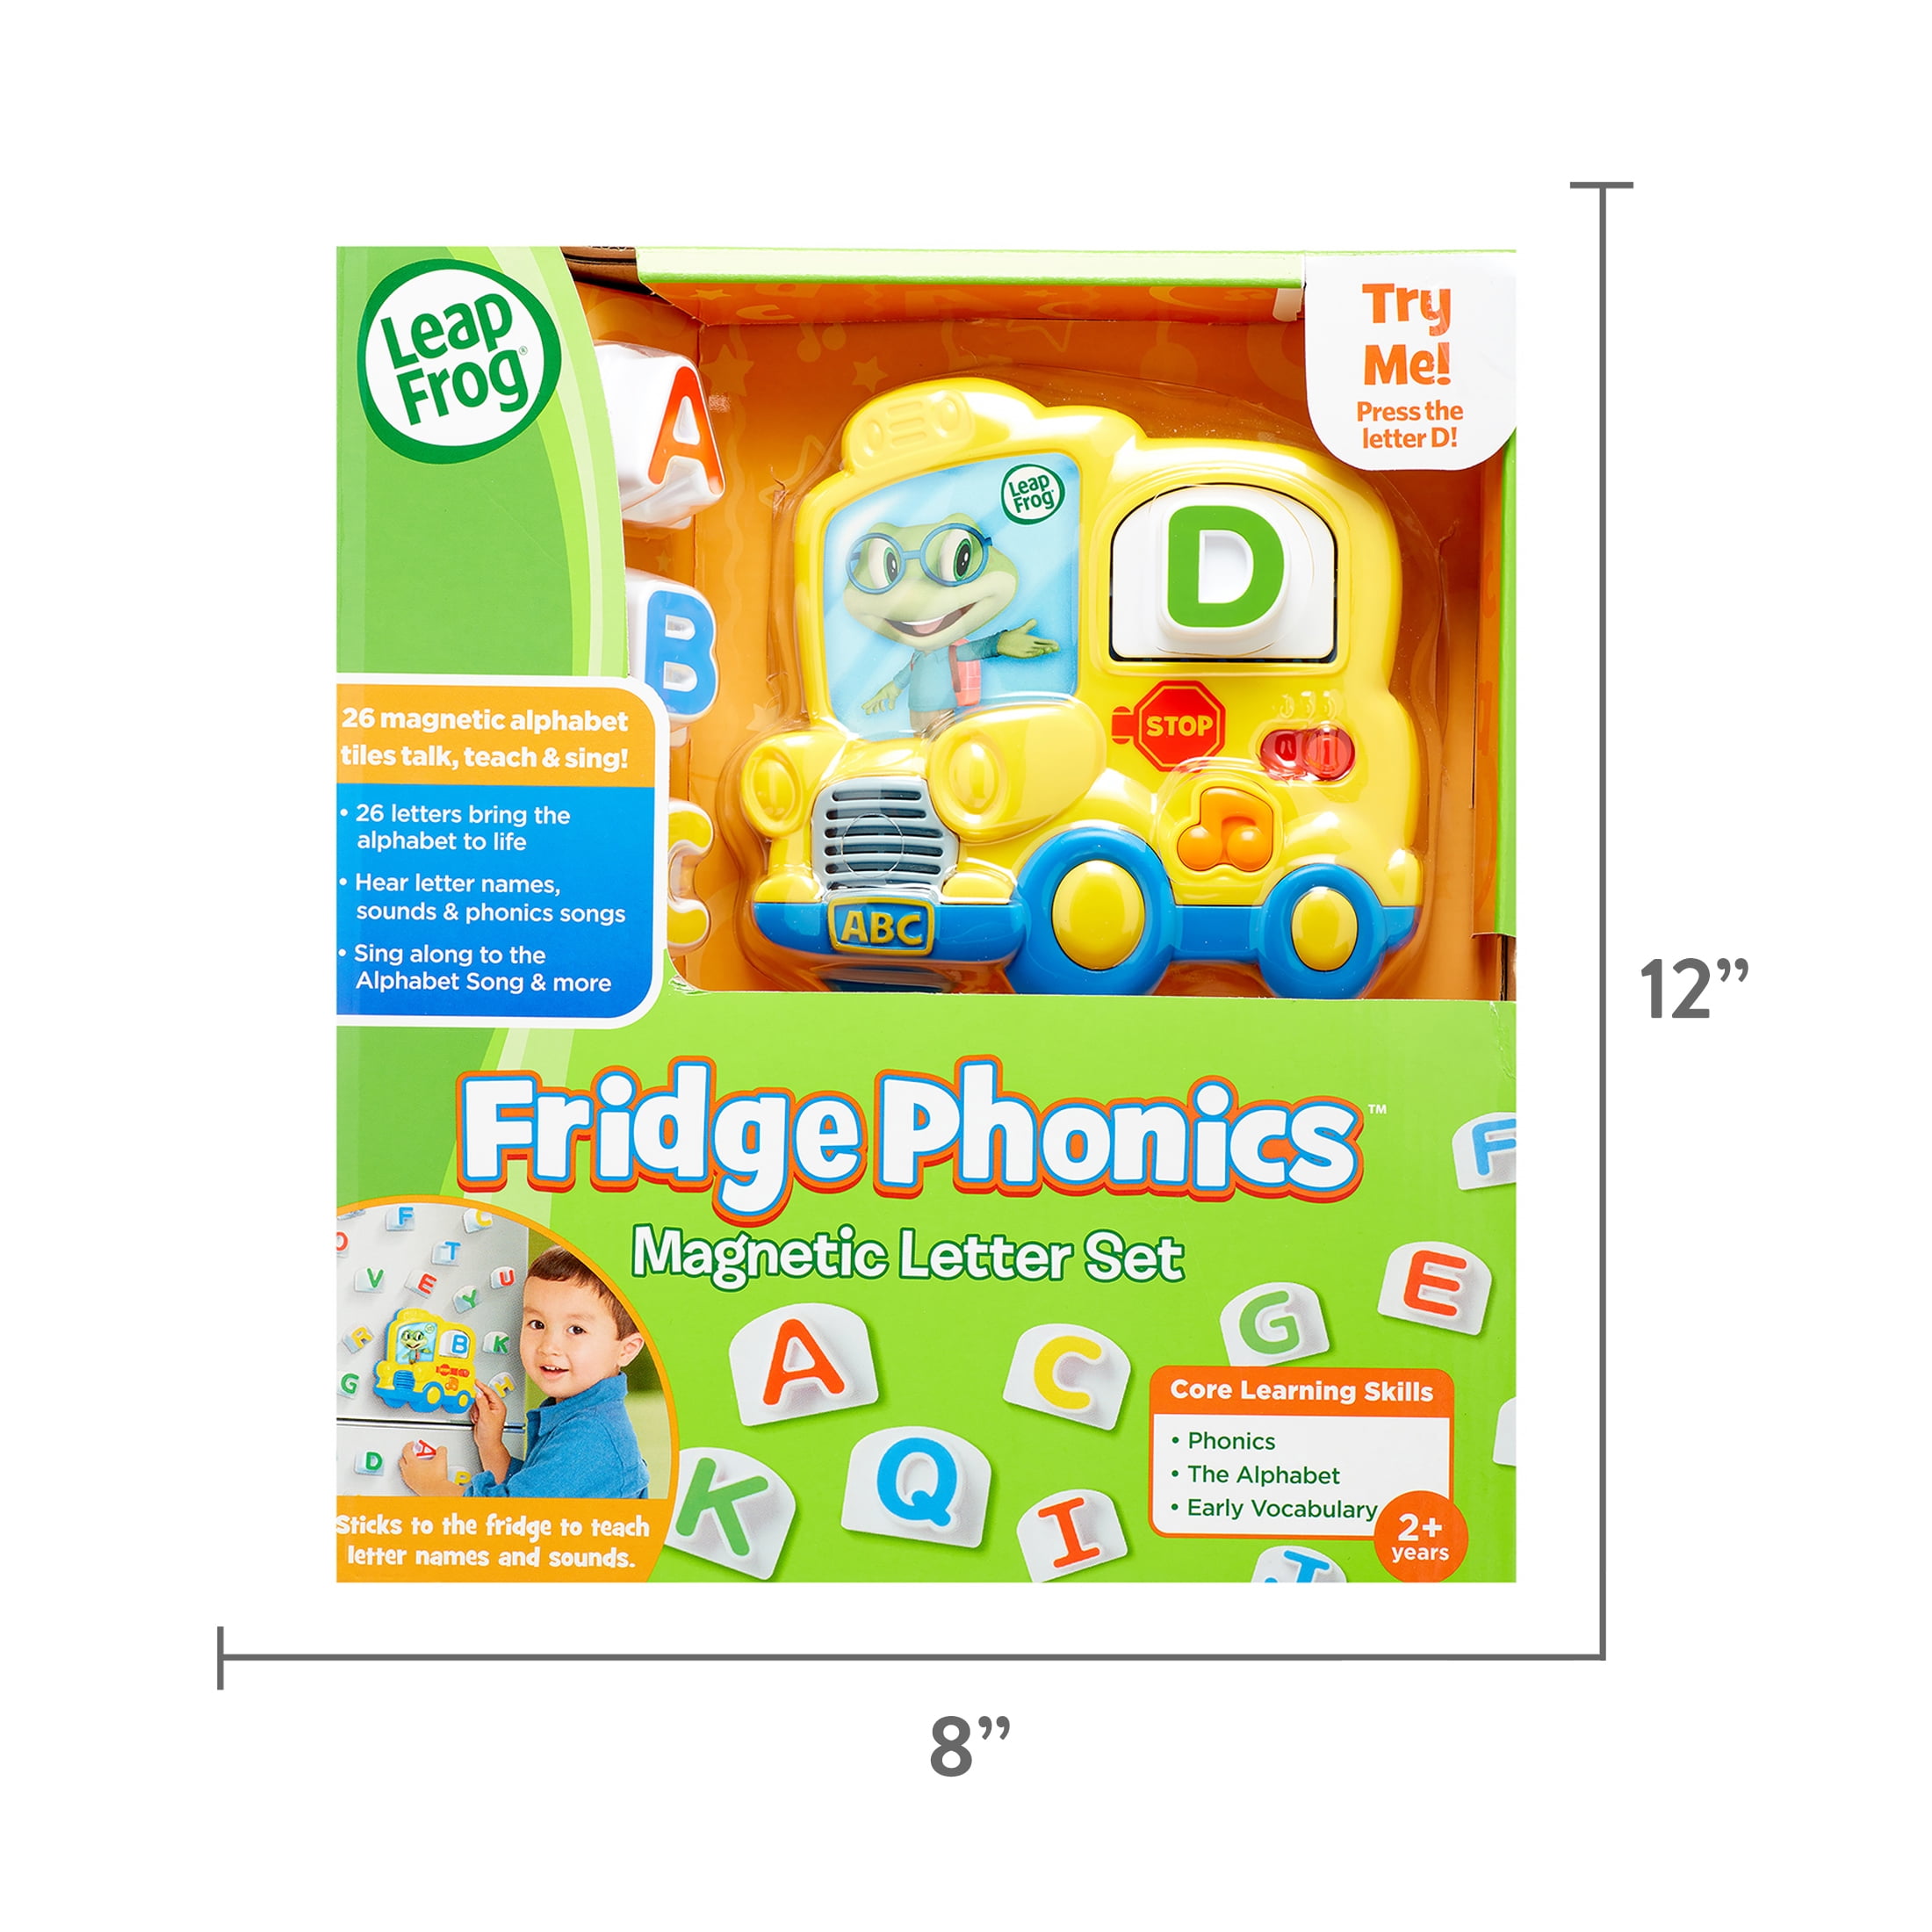 Large Size Replacement Leapfrog Fridge Phonics Letters You pick 3 for $3.00 